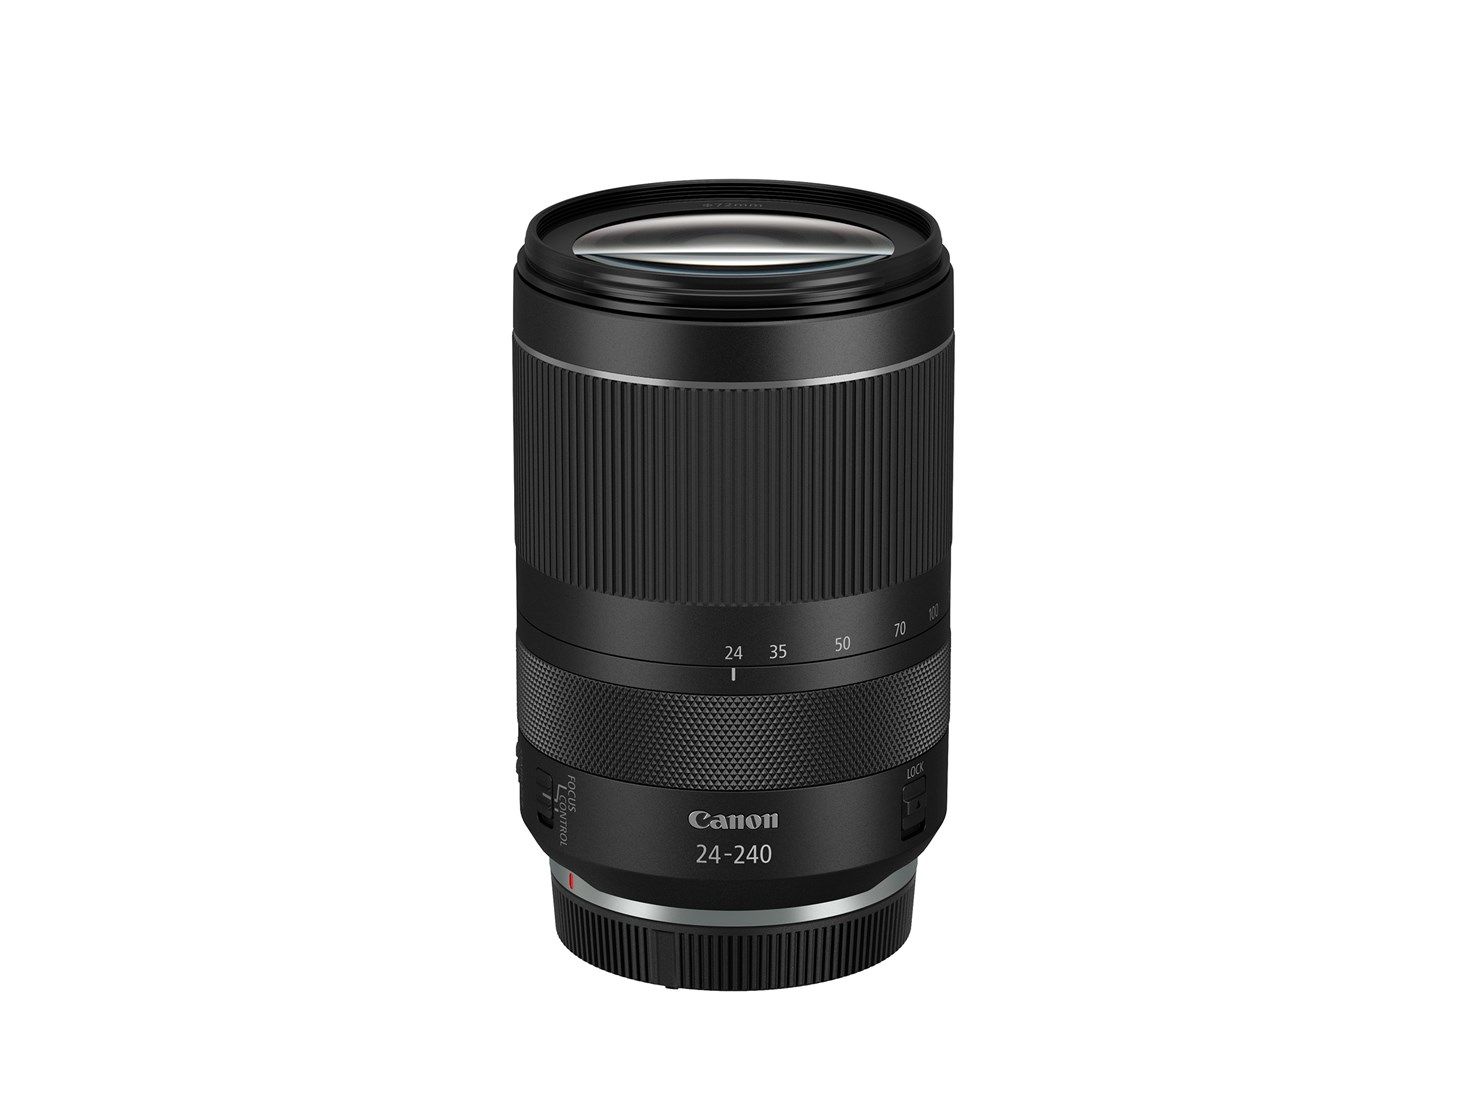 Canon RF 24-240mm f4-6.3 IS USM Lens For EOS R System